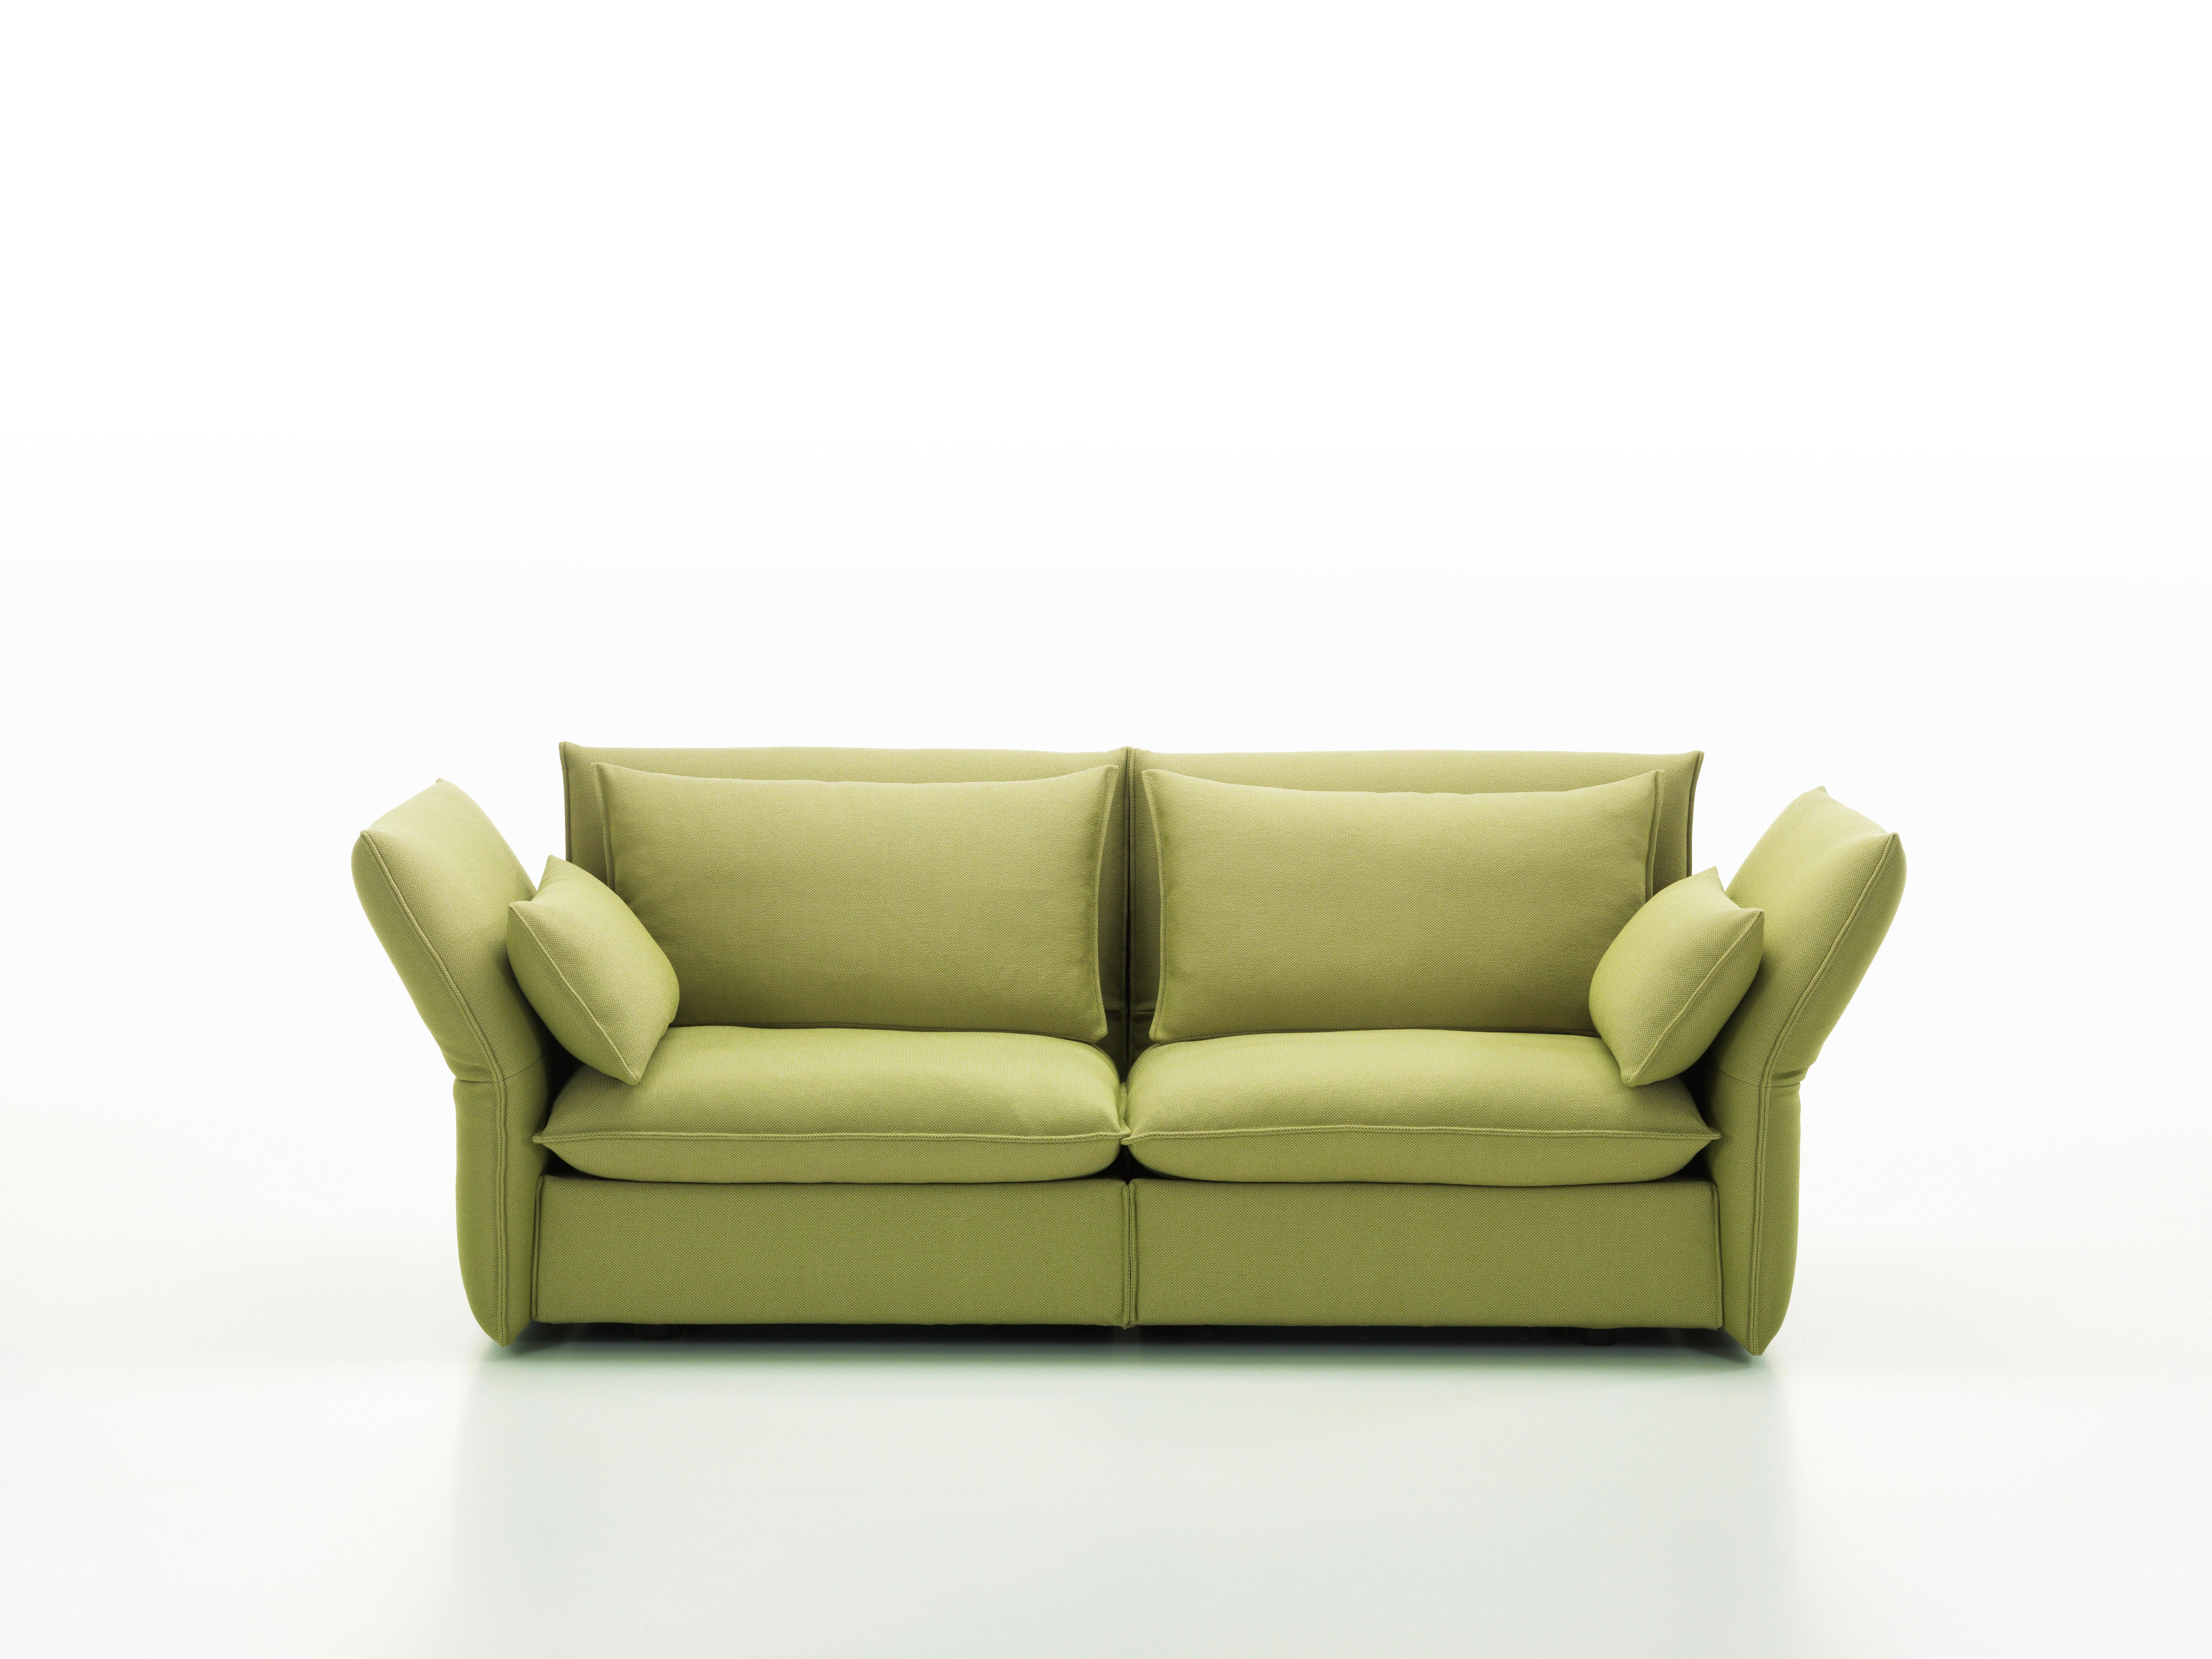 Contemporary Vitra Mariposa 2 1/2-Seat Sofa in Sand Avocado by Edward Barber & Jay Osgerby For Sale